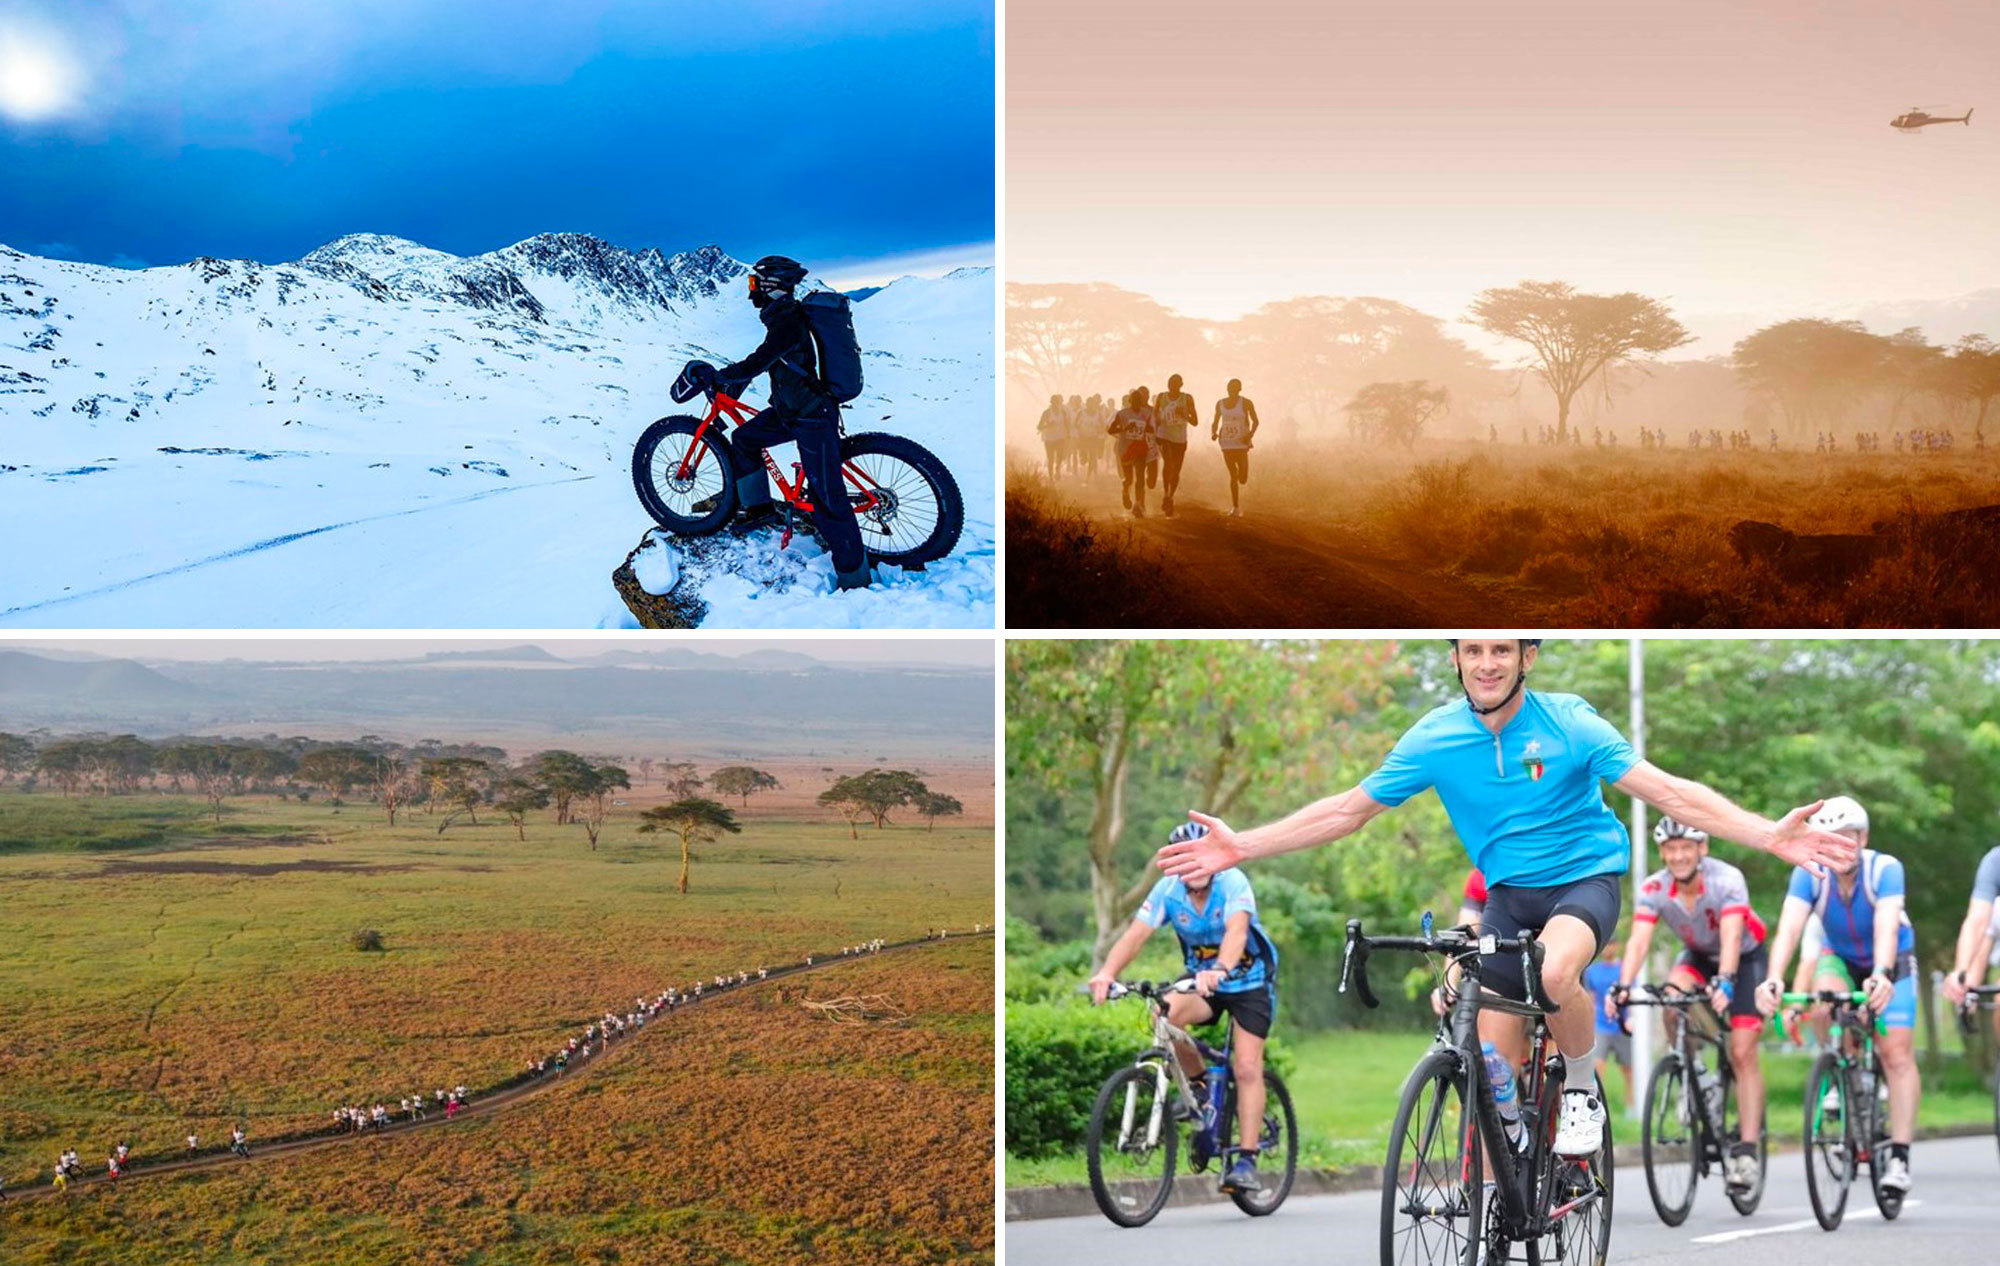 Cathay Pacific pilots support charity events like the Arctic Circle Trail fatbiking and Safaricom Marathon in Kenya